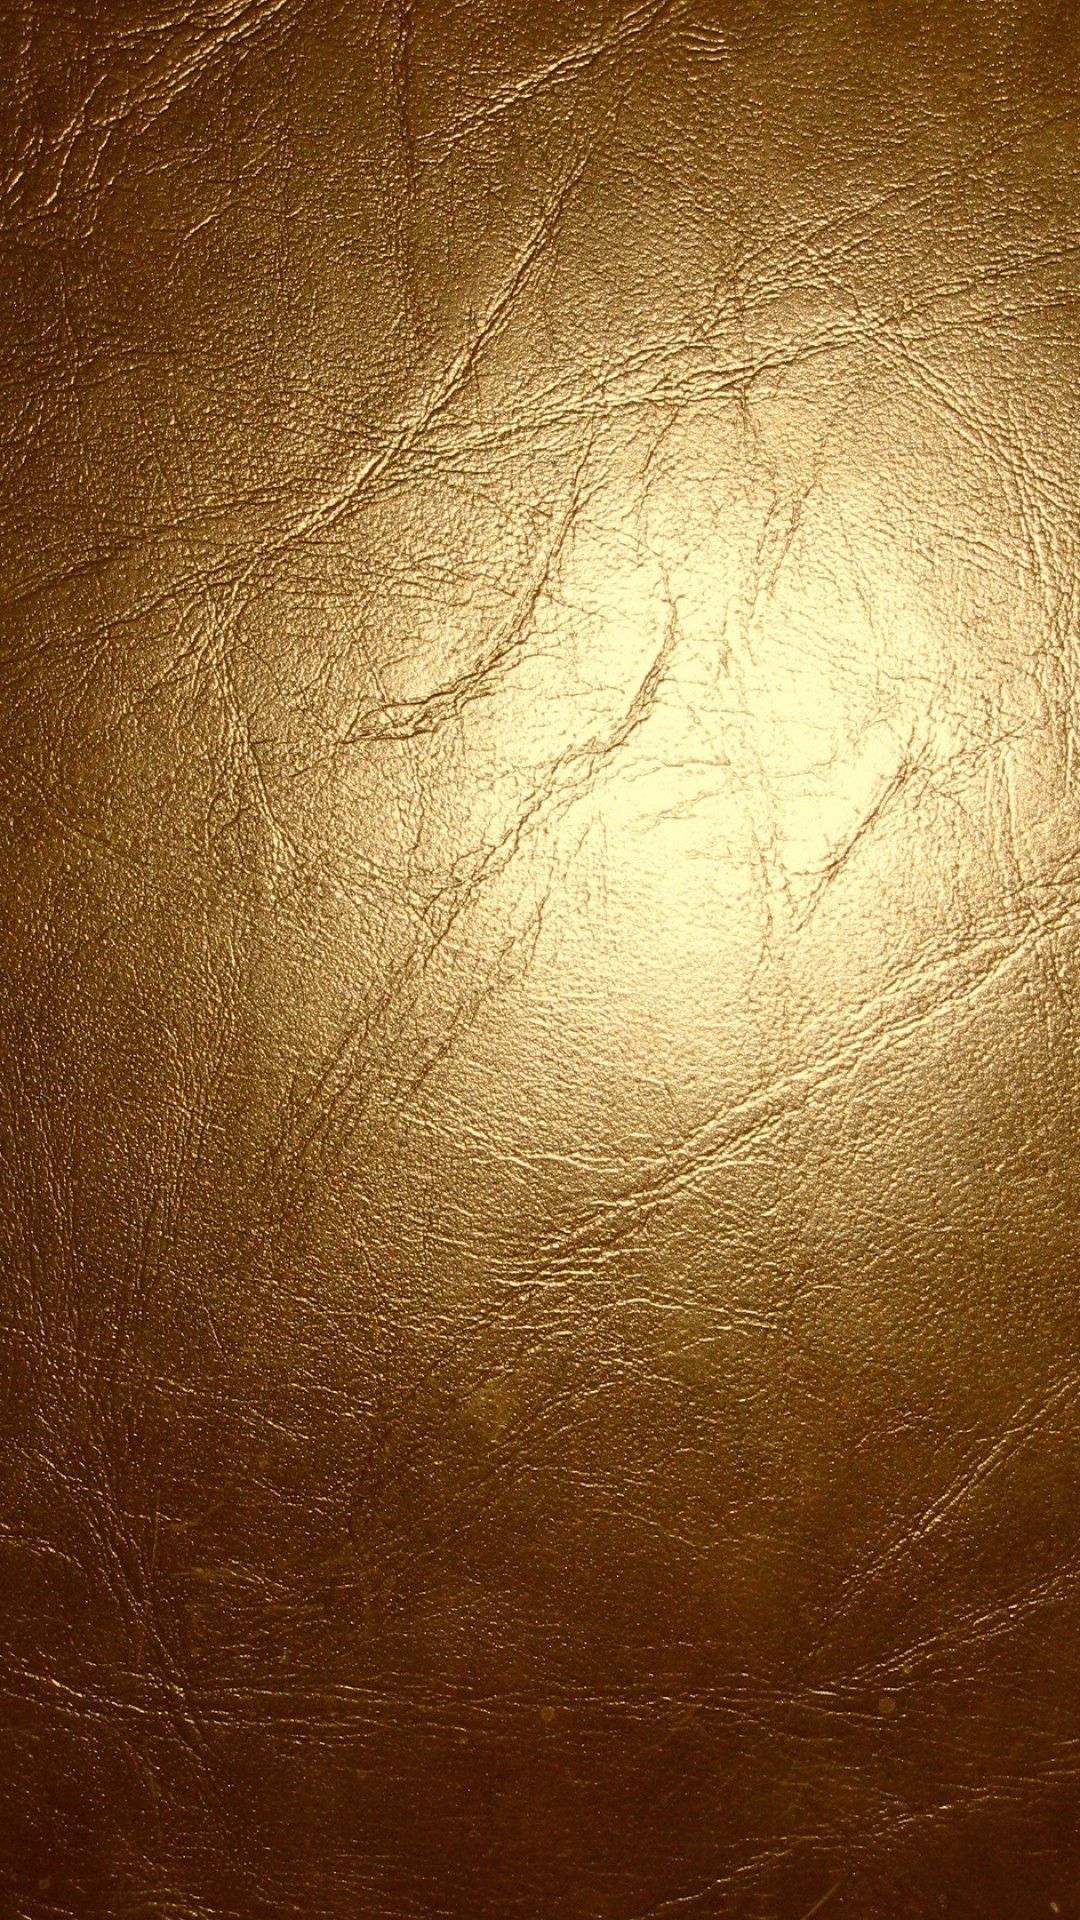 Metallic Gold Wallpaper For Android Android Wallpaper. Gold wallpaper android, Gold wallpaper, Android wallpaper